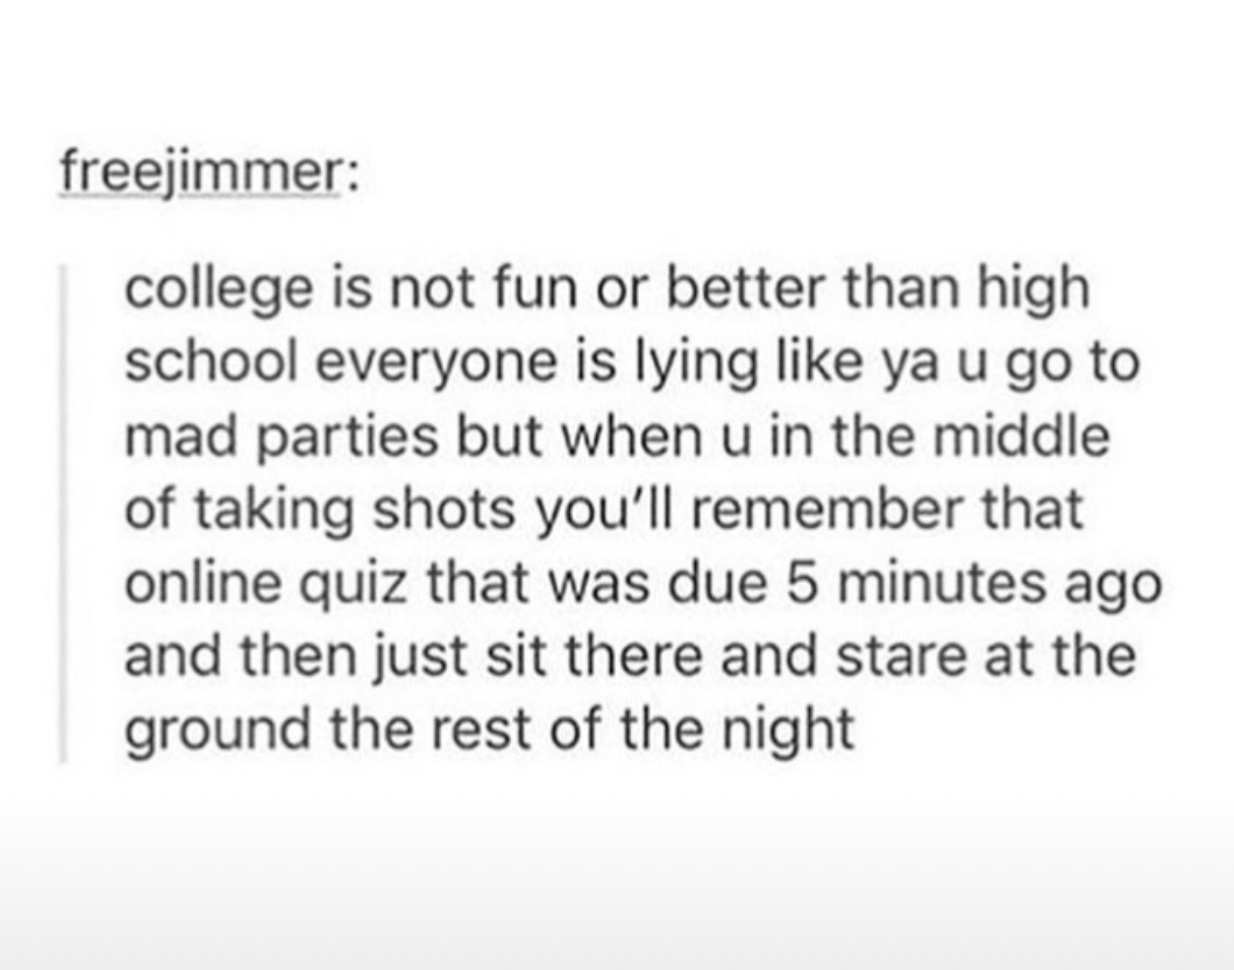 Meme expressing that college isn&#x27;t better than high school due to stress about missed online quizzes